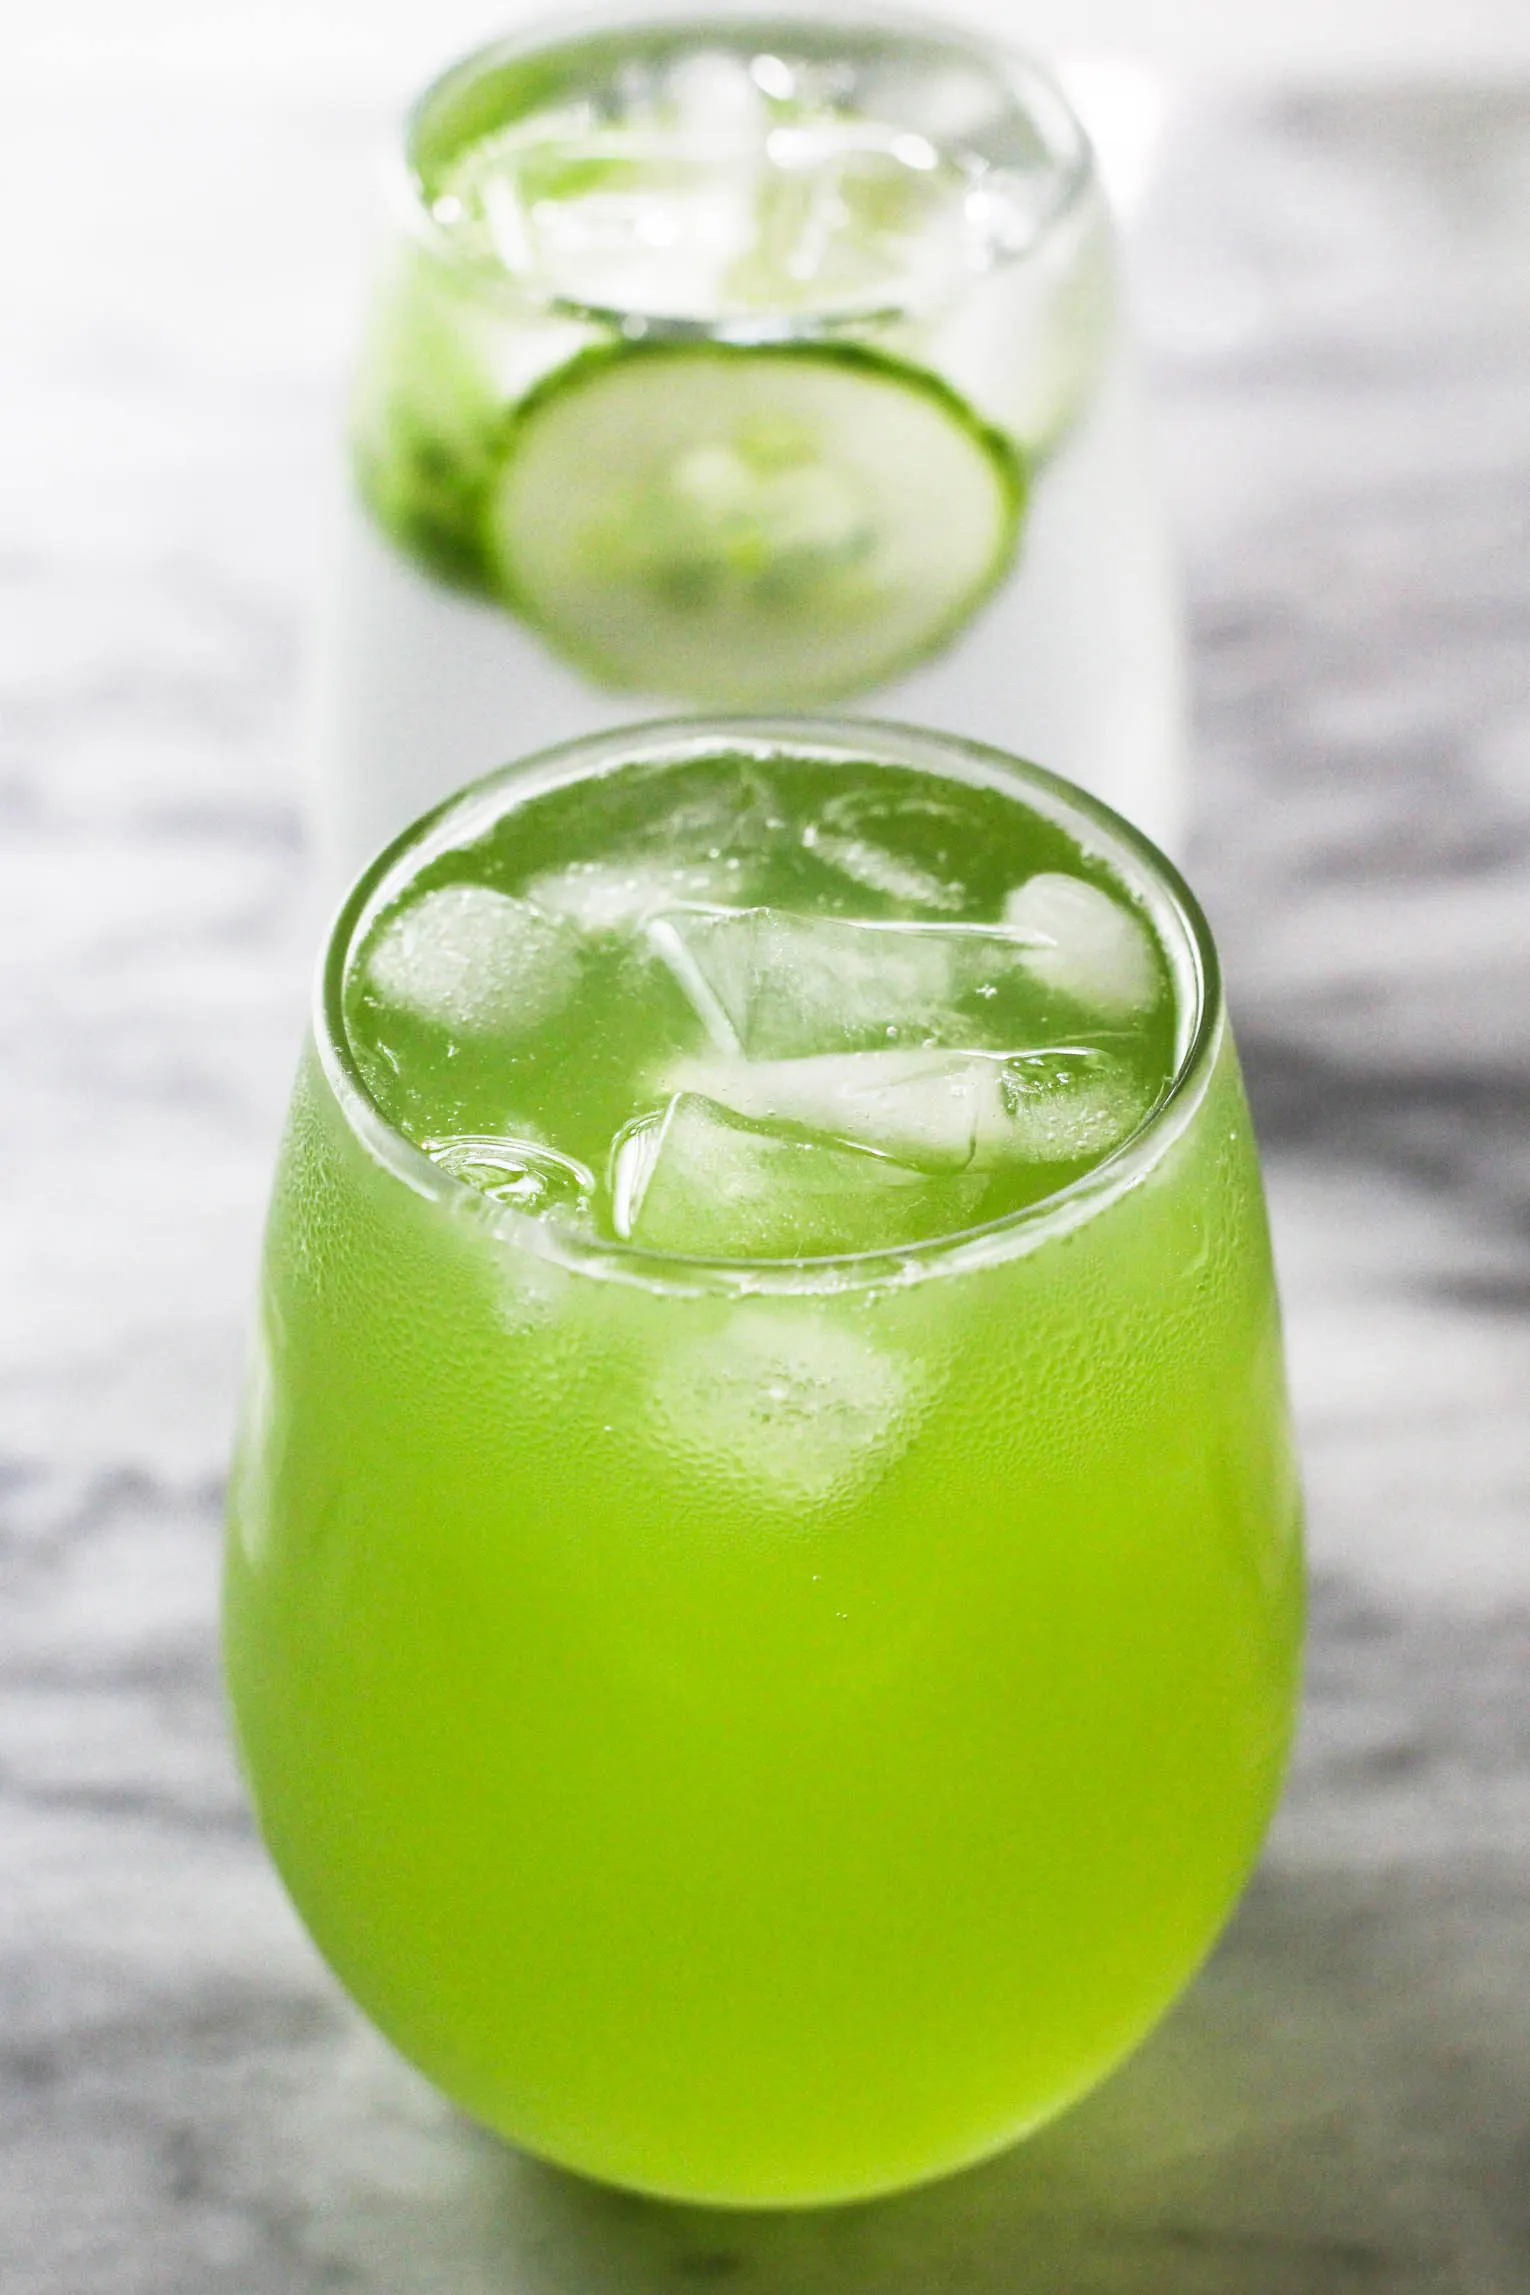 A glass with cucumber juice water and ice. There is another glass with water and cucumber slices in the background.